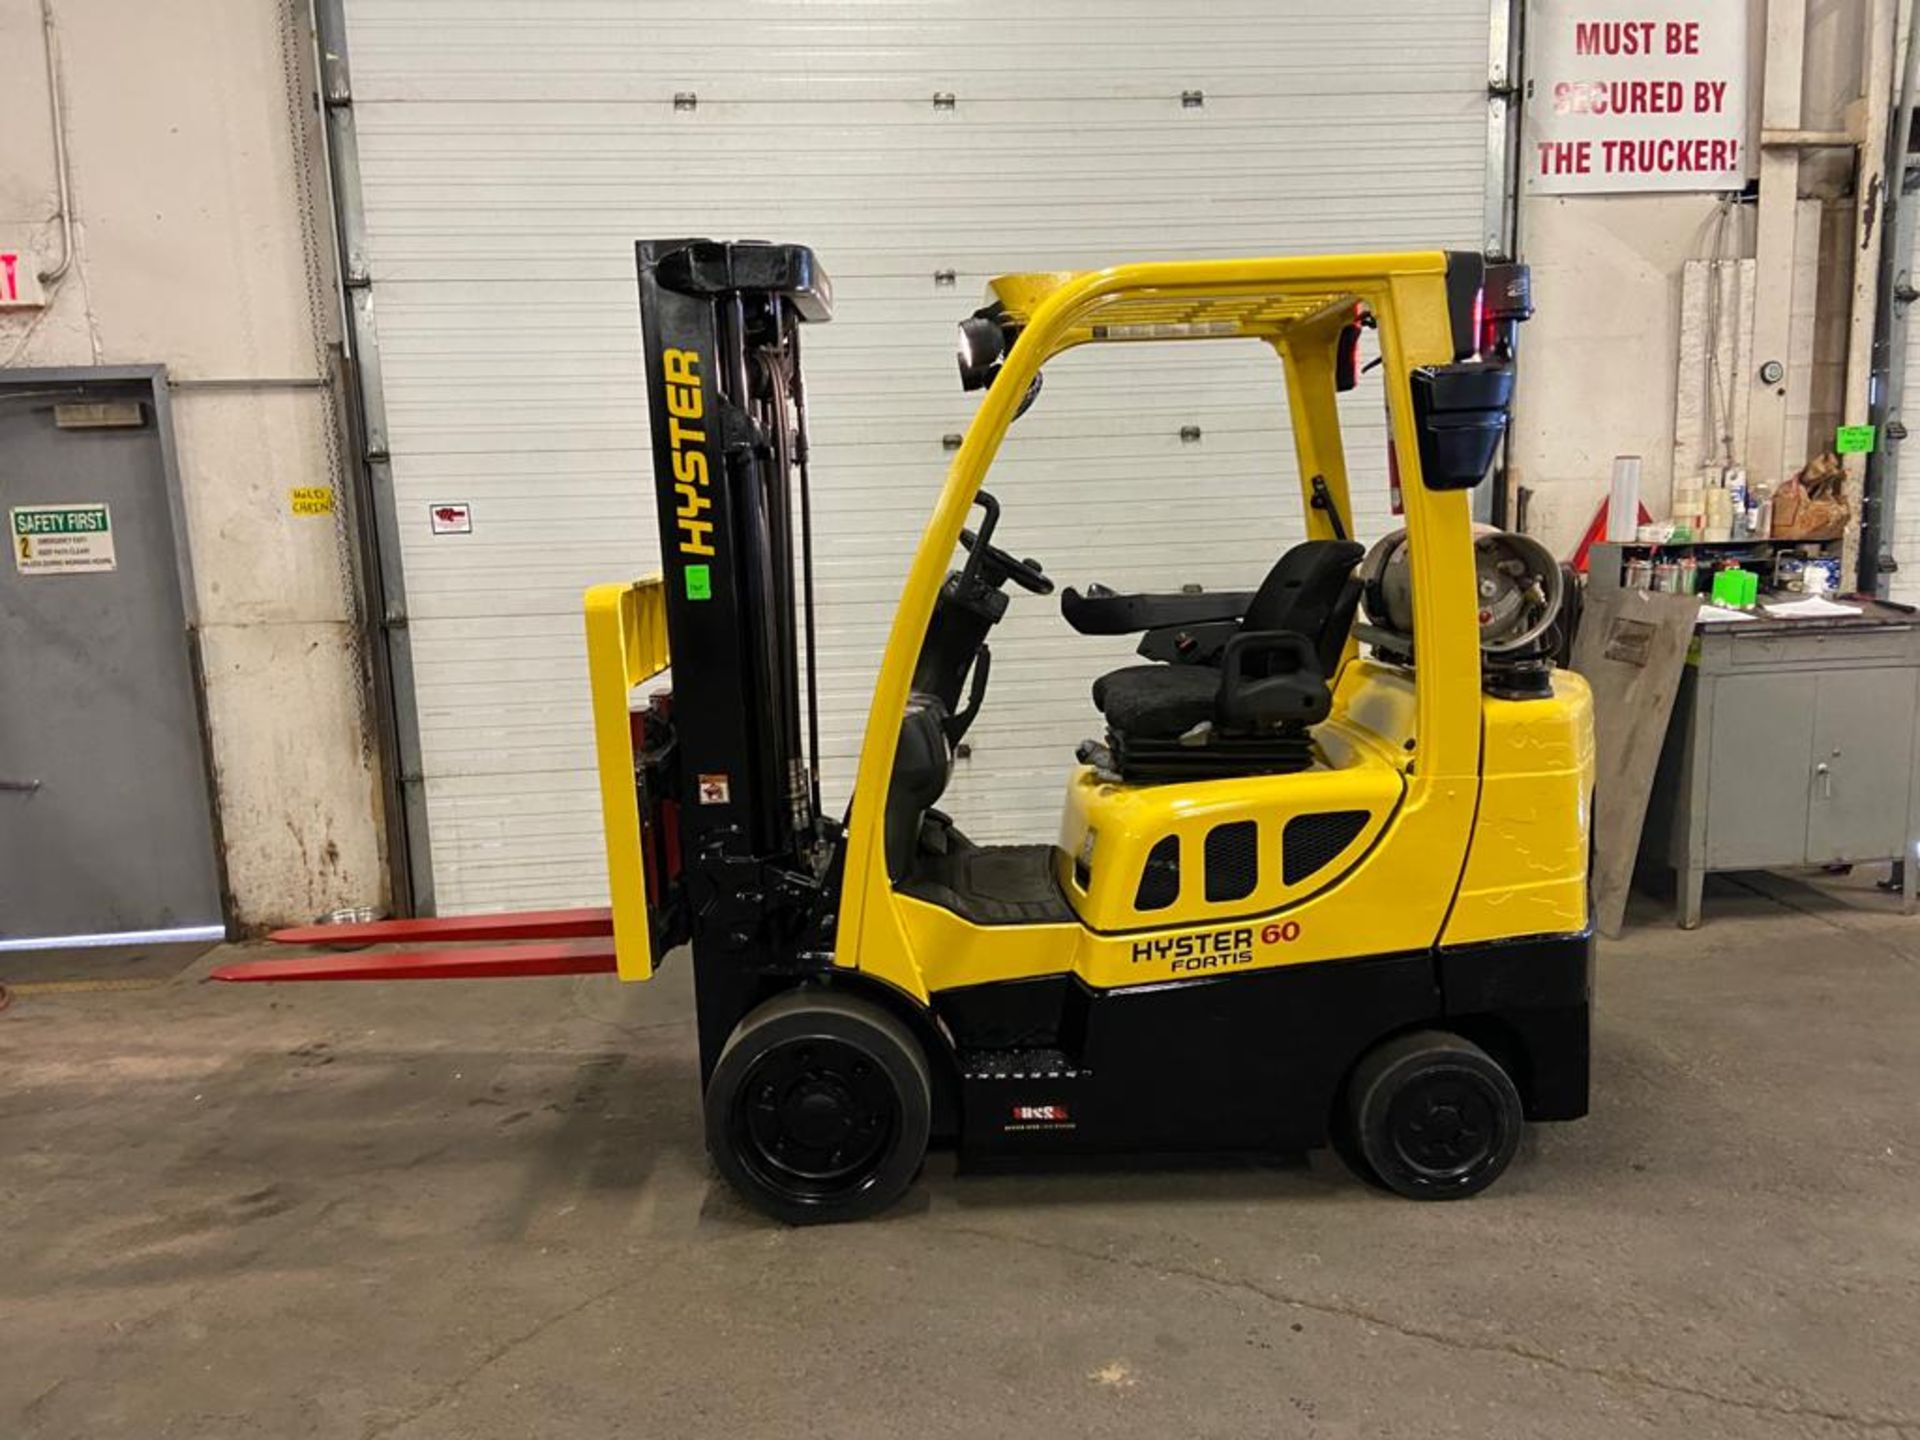 FREE CUSTOMS - 2016 Hyster 6000lbs Capacity Forklift LPG (propane) with 3-STAGE MAST (propane tank